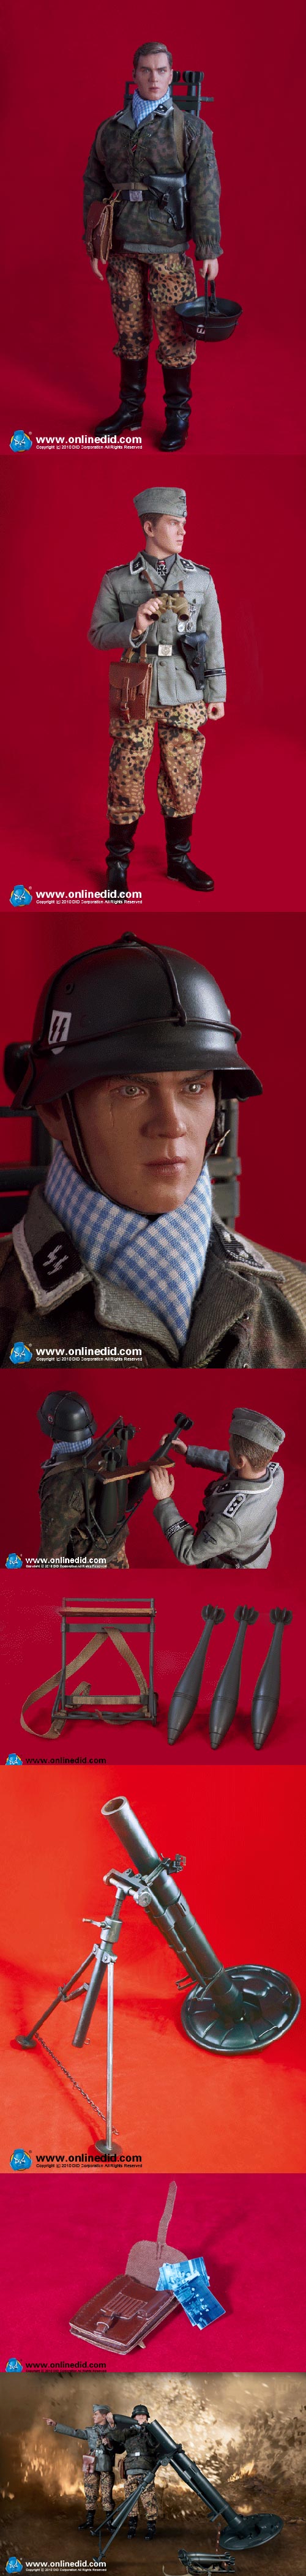 【DID】D80076 12th SS PANZER DIVISION NCO with 12cm Granatwerfer 42 Hayden Christ